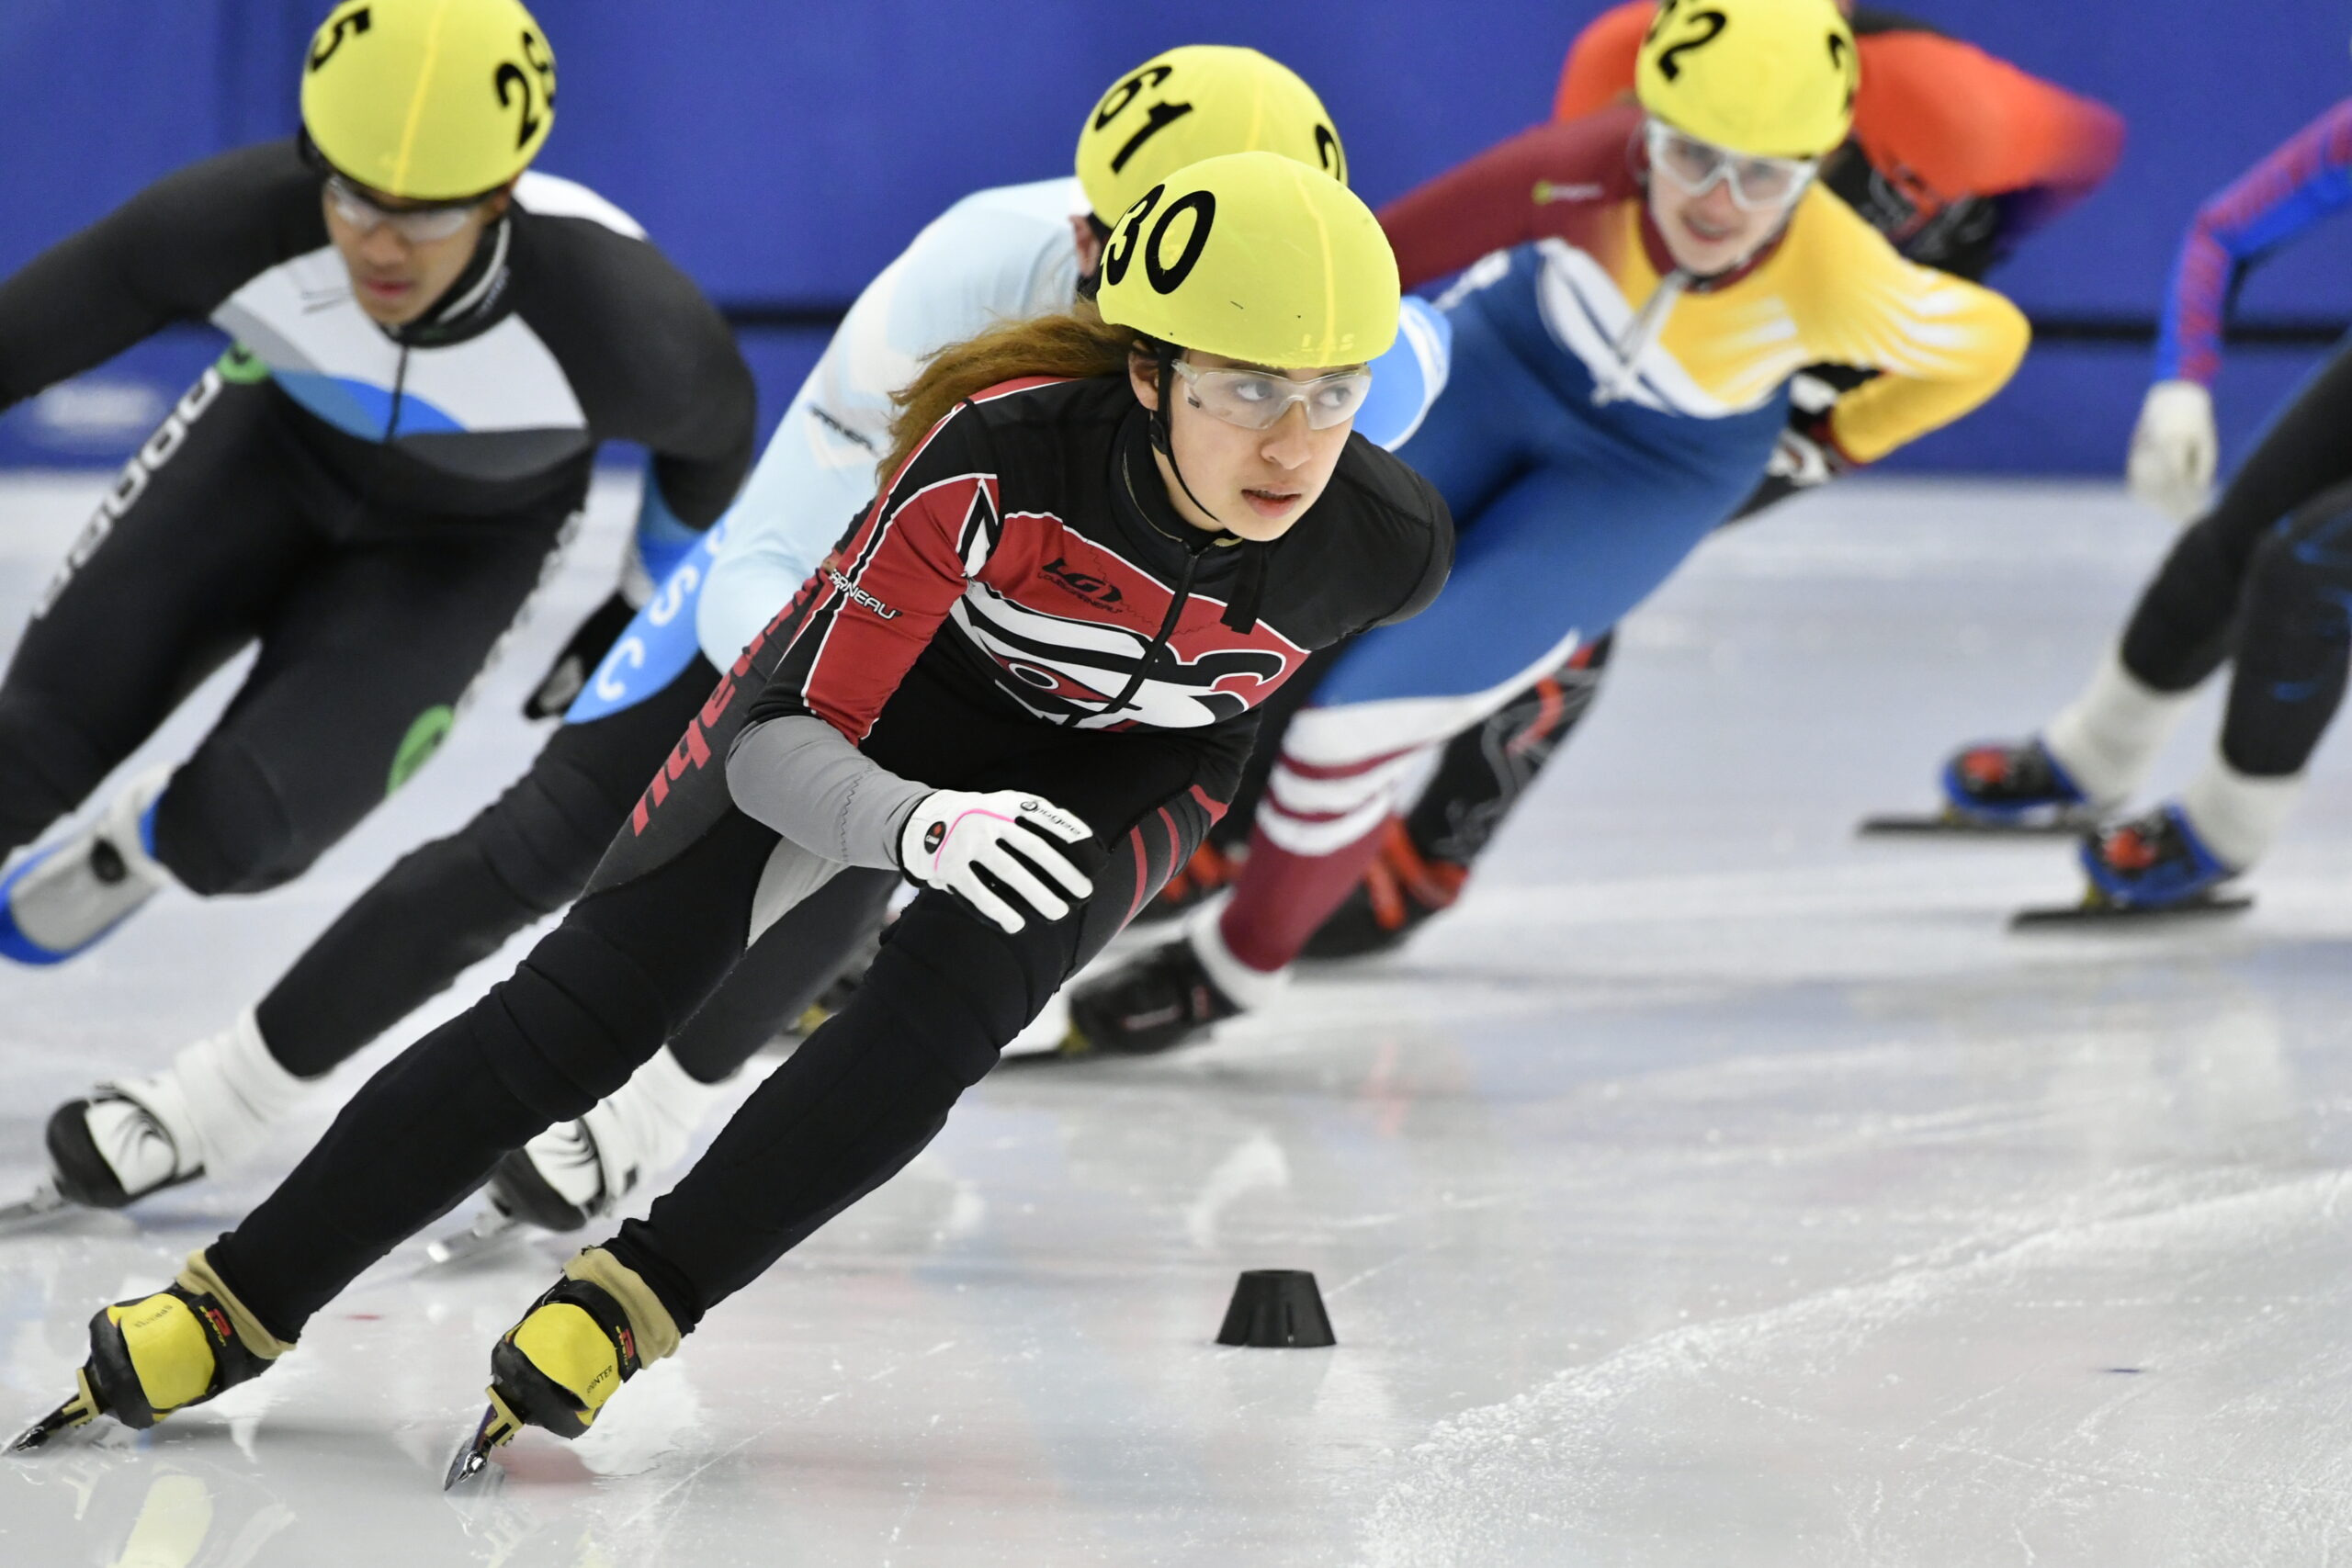 Photo from a speed skating match.